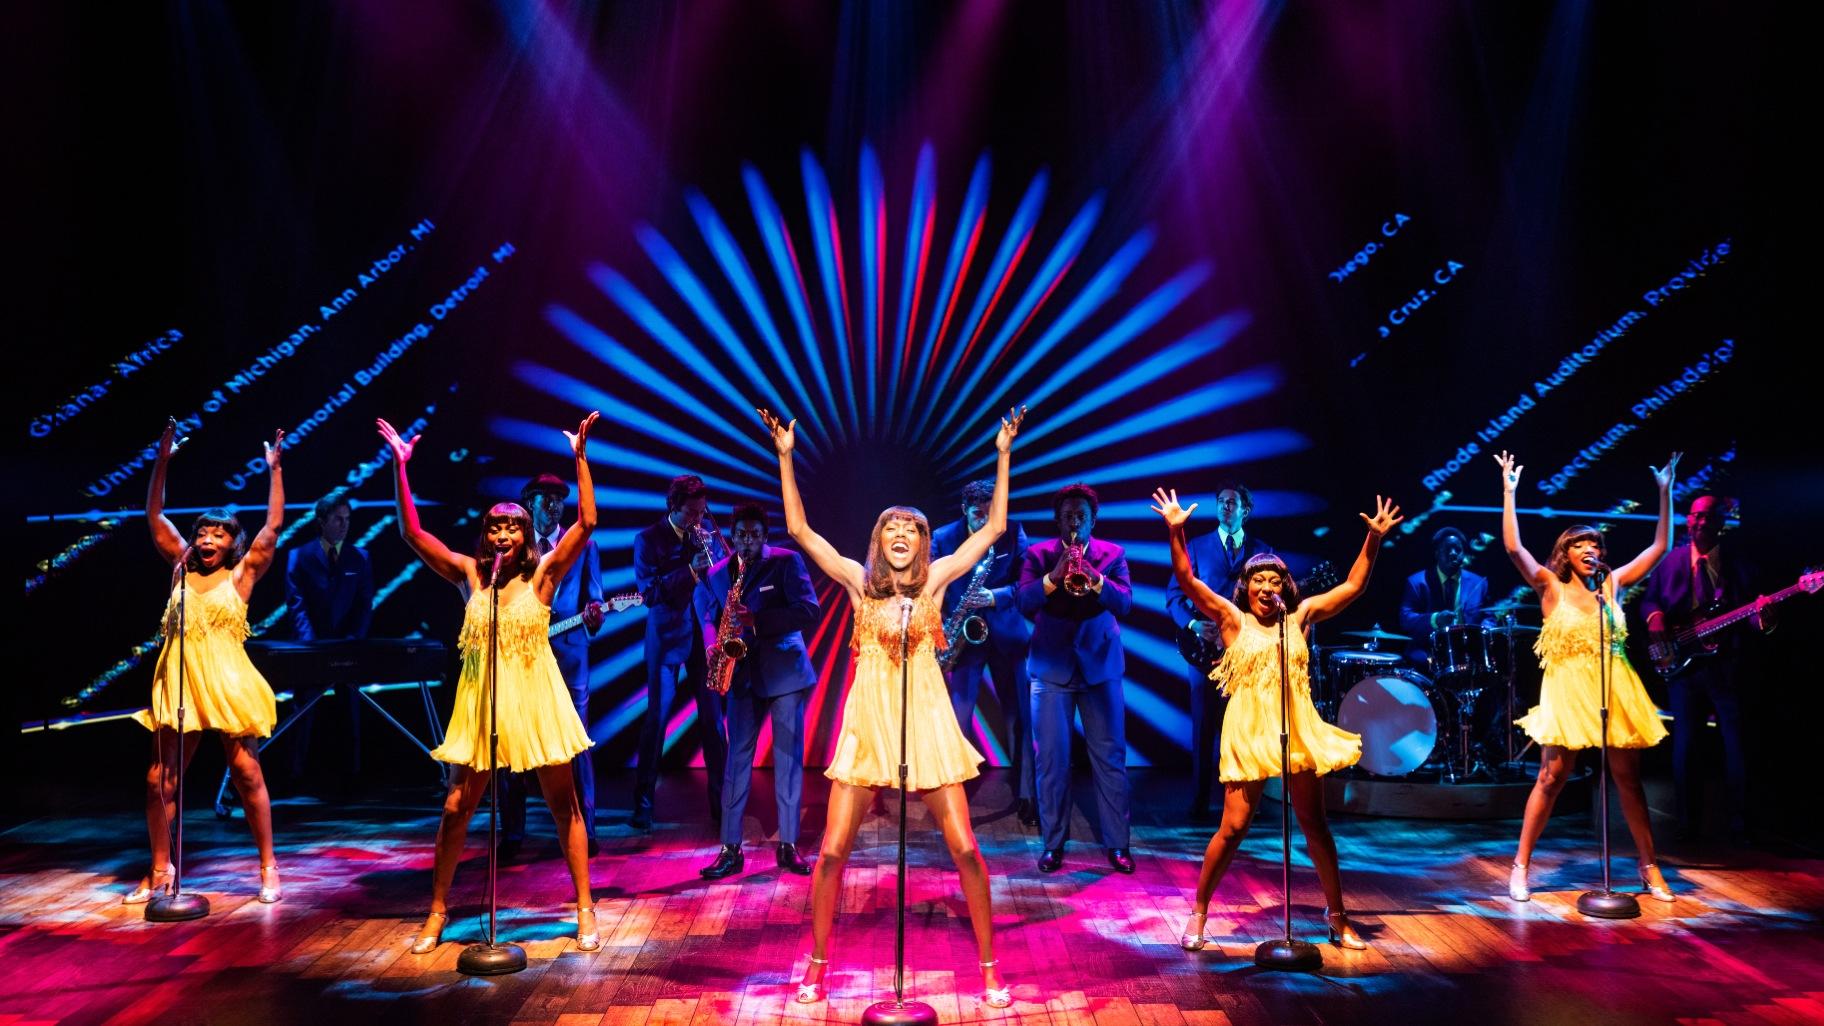 Zurin Villanueva performing “Higher” as Tina Turner and the cast of the North American touring production of “Tina: The Tina Turner Musical.” (Evan Zimmerman / MurphyMade)